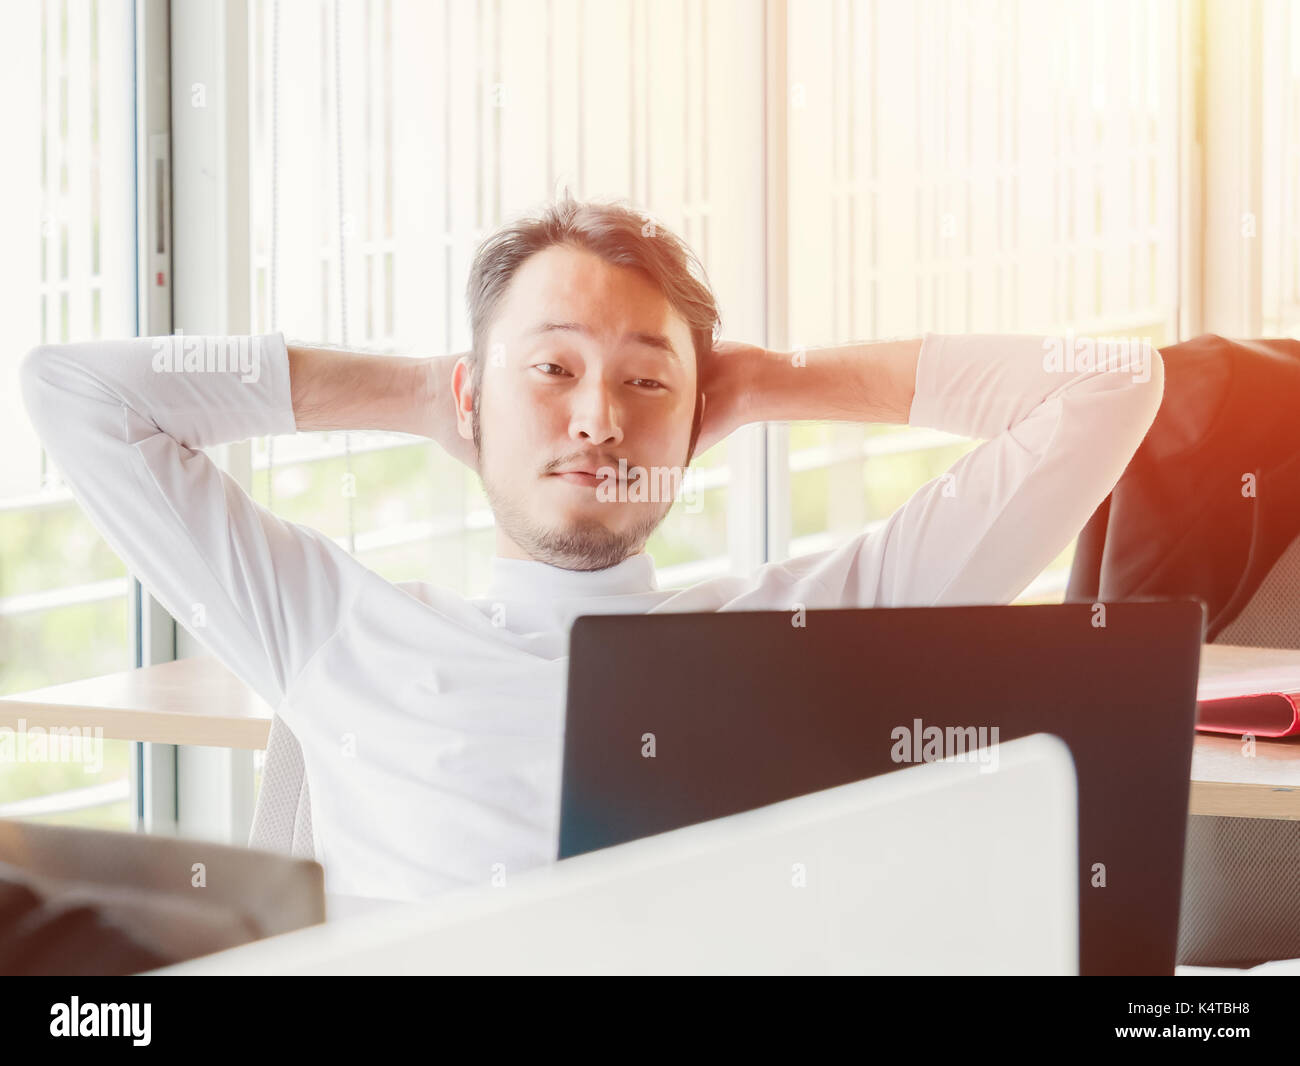 Relaxed casual young man working on laptop in office Stock Photo